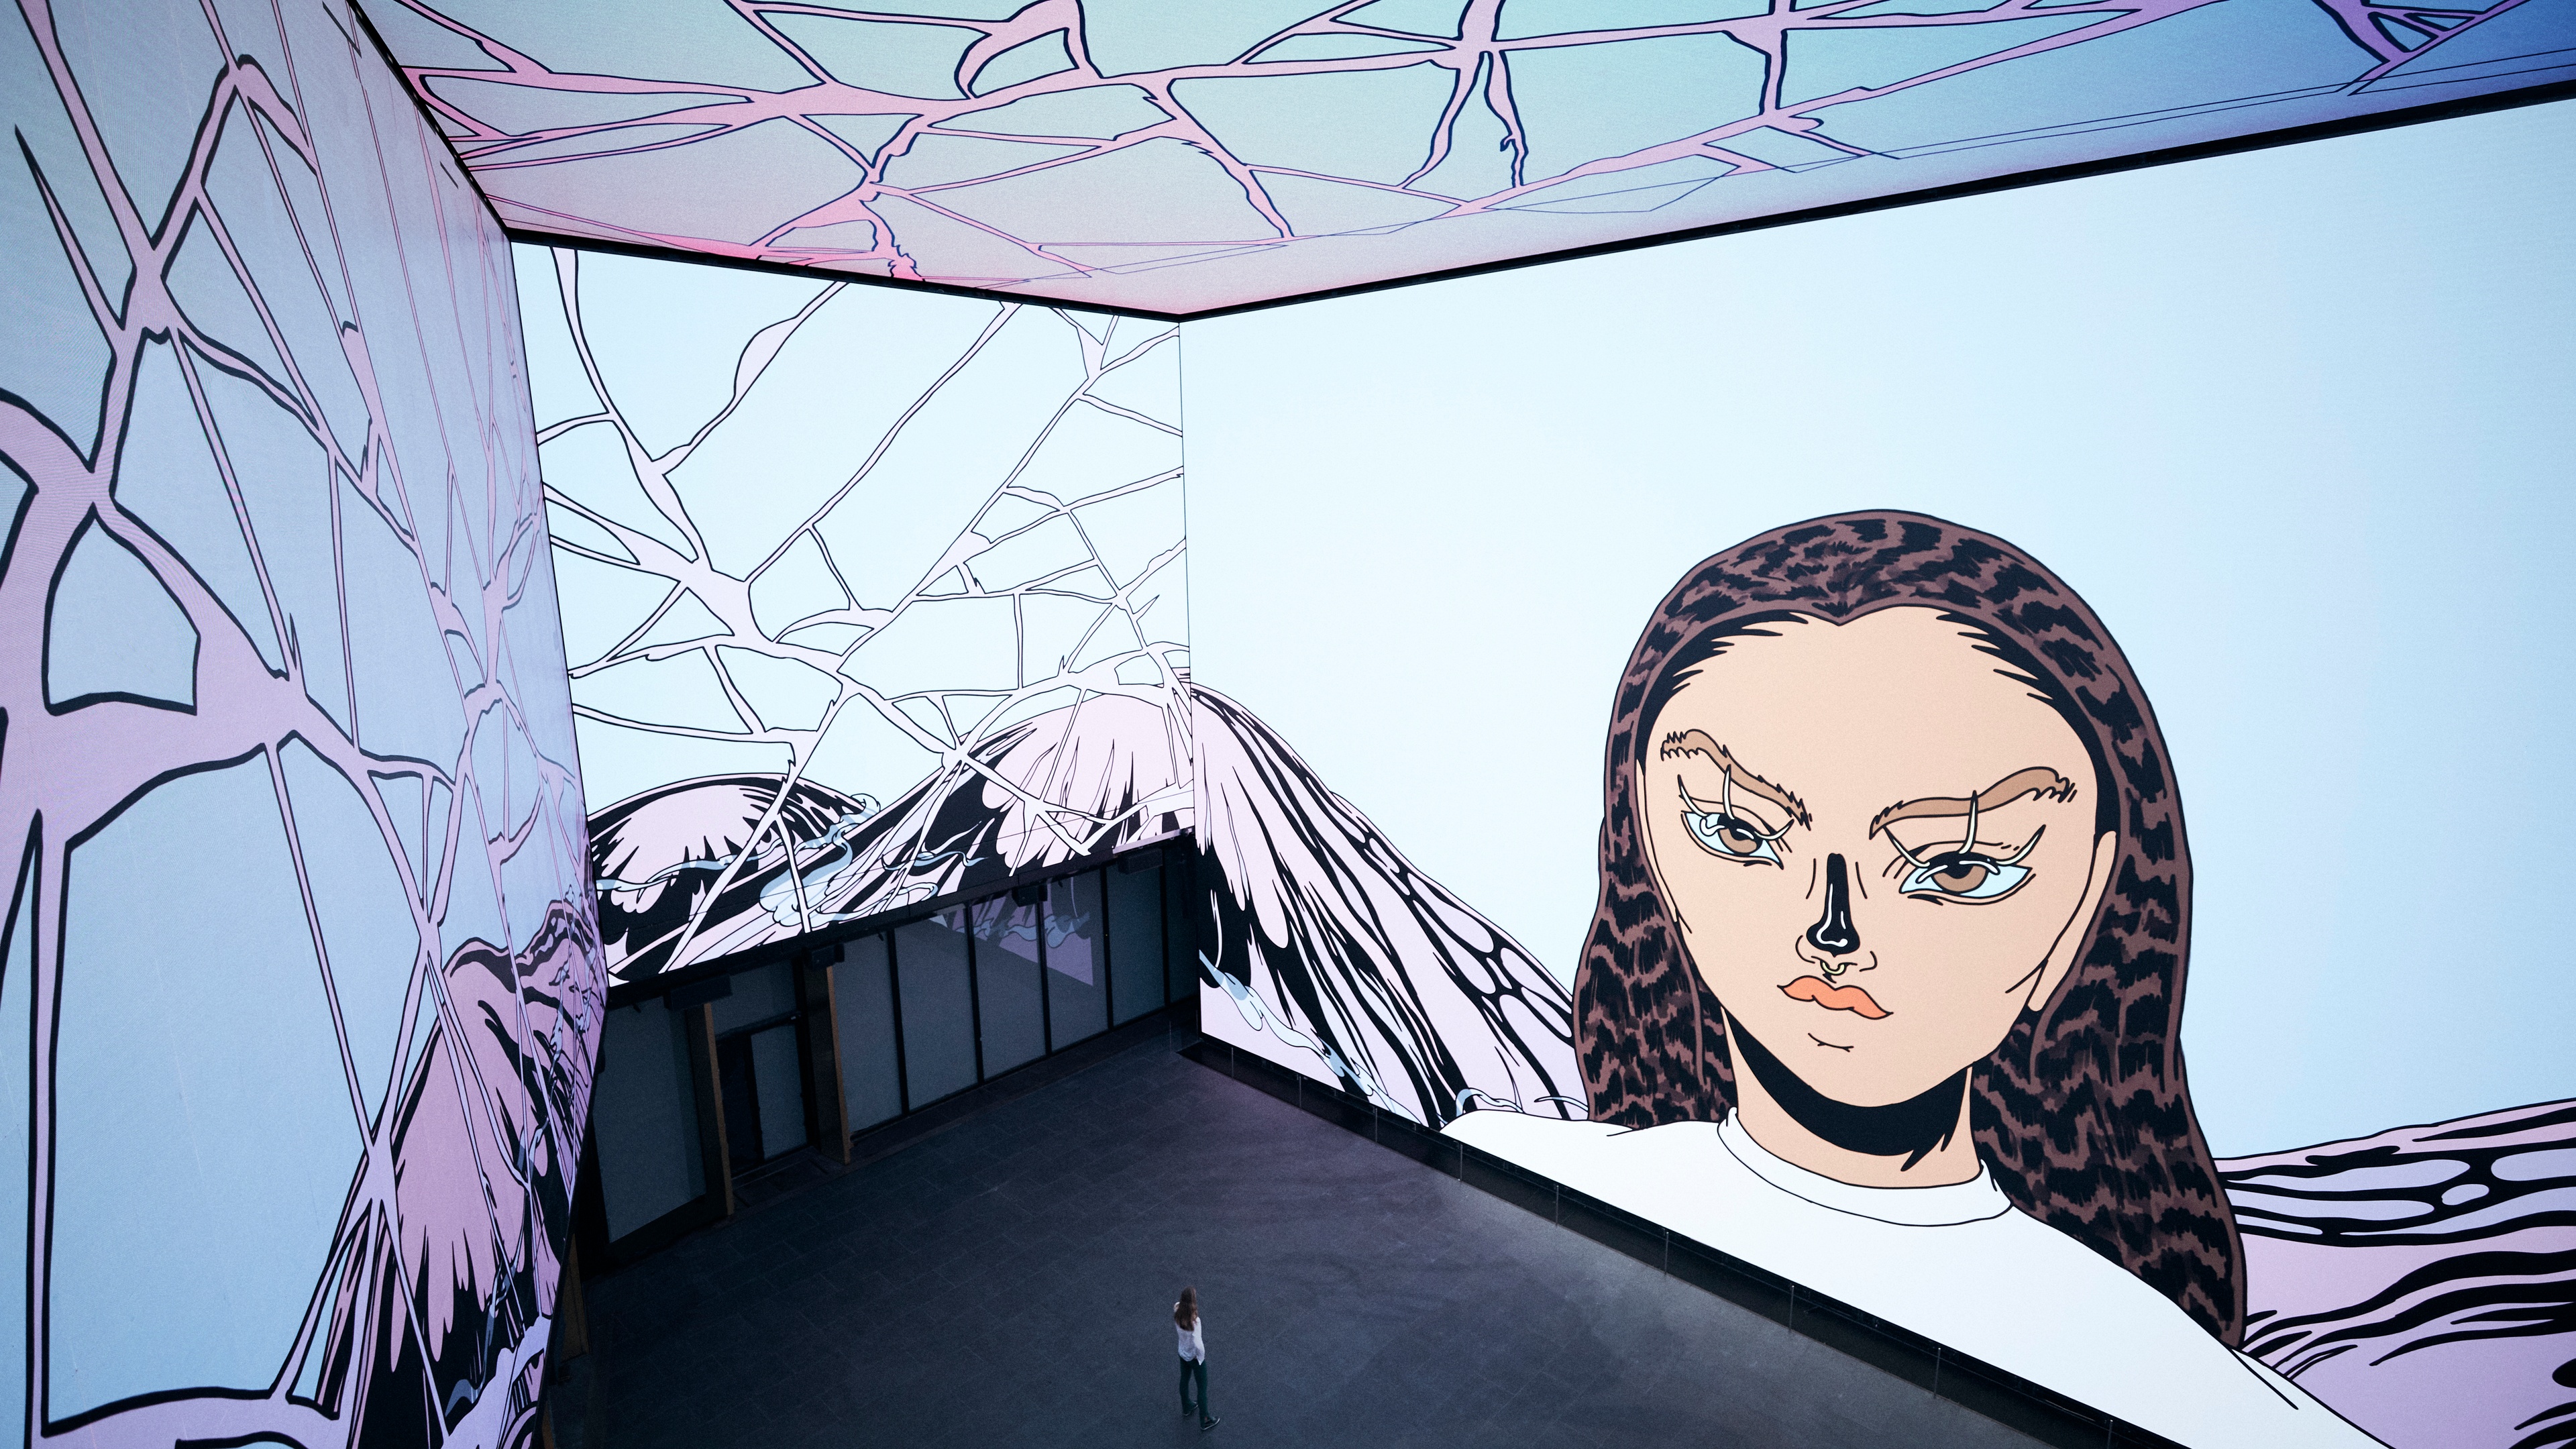 Huge LED screen room with graphic artwork surrounding person stood in the middle